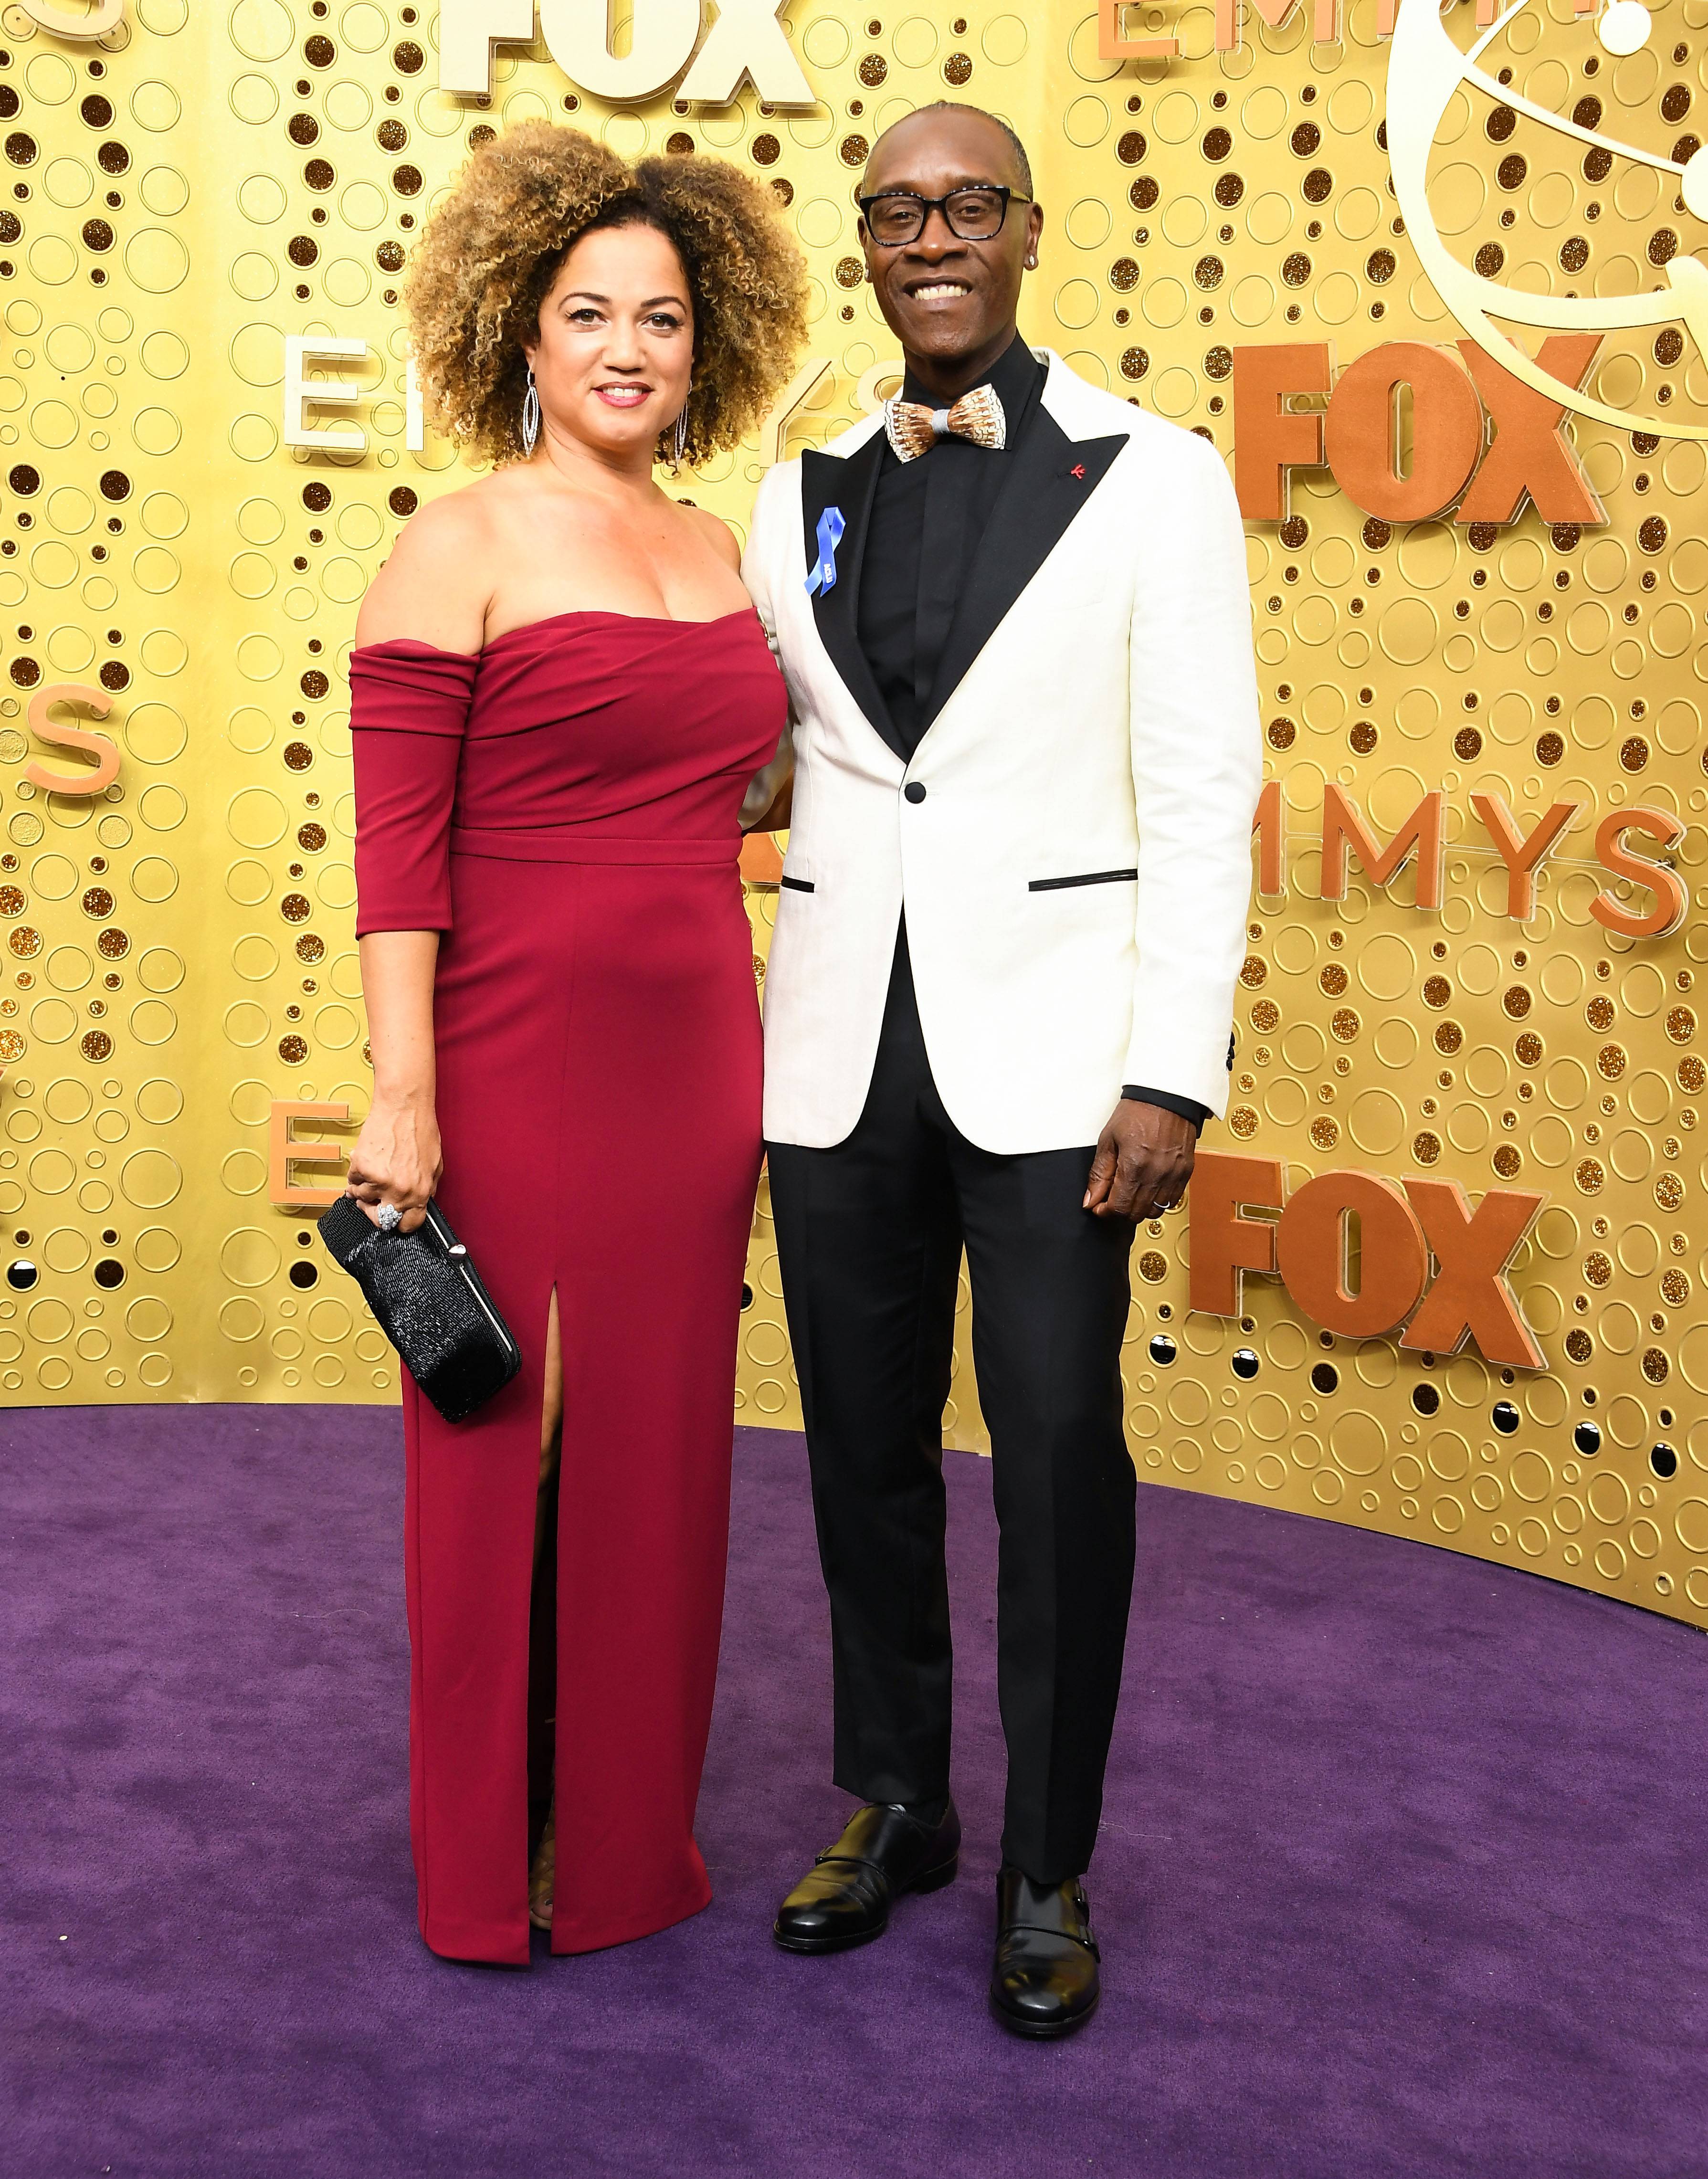 LOS ANGELES, CALIFORNIA - SEPTEMBER 22: Bridgid Coulter and Don Cheadle arrives at the 71st Emmy Awards at Microsoft Theater on September 22, 2019 in Los Angeles, California. (Photo by Steve Granitz/WireImage)